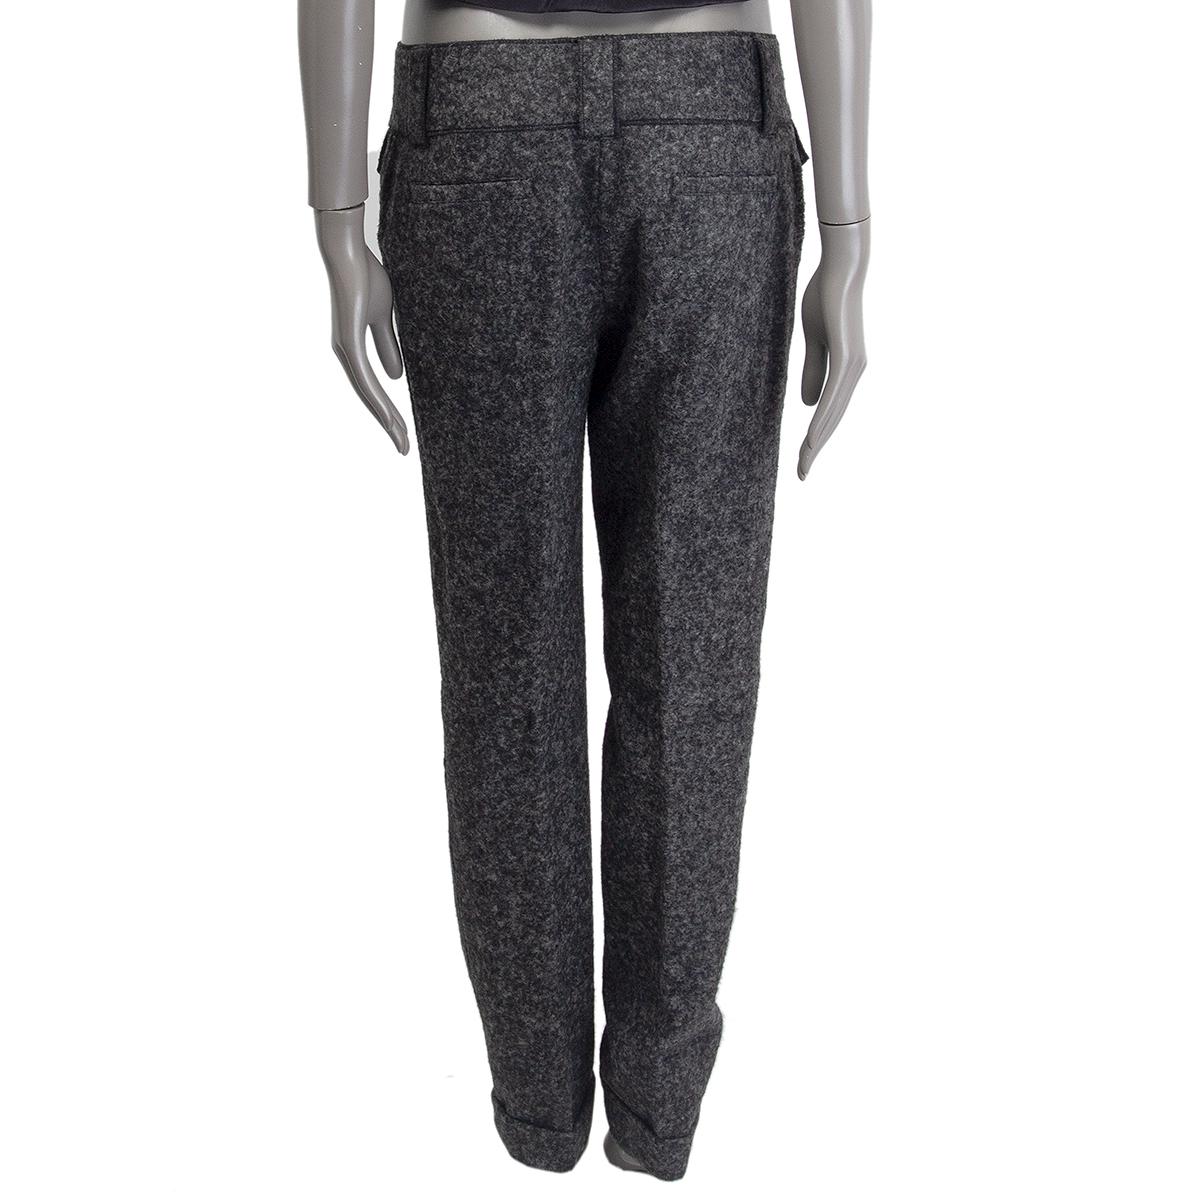 DOLCE & GABBANA grey & black alpaca FLAP POCKET TAPERED Pants 42 M In Excellent Condition For Sale In Zürich, CH